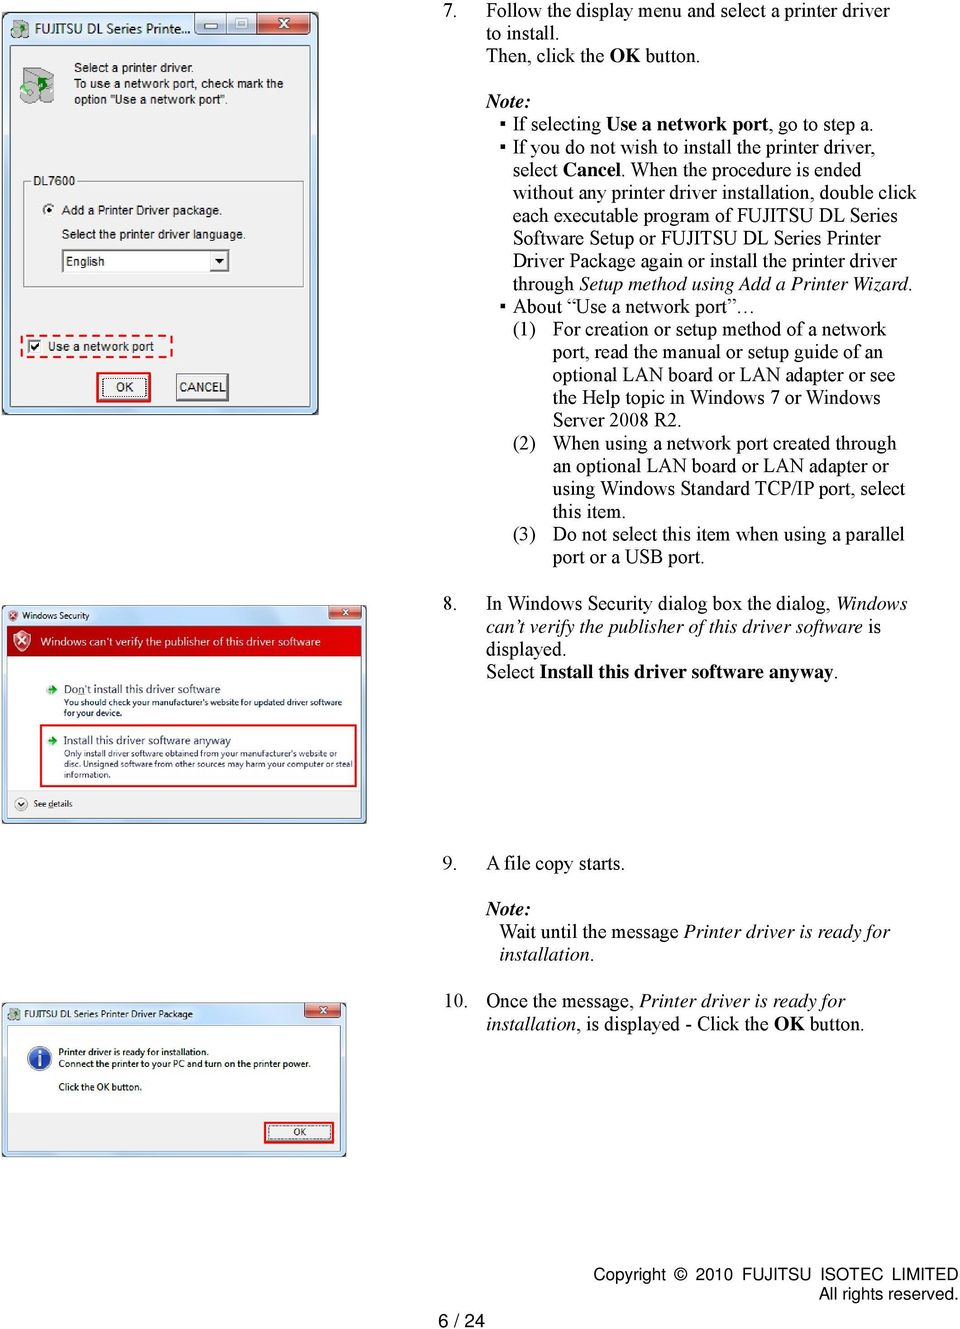 When the procedure is ended without any printer driver installation, double click each executable program of FUJITSU DL Series Software Setup or FUJITSU DL Series Printer Driver Package again or